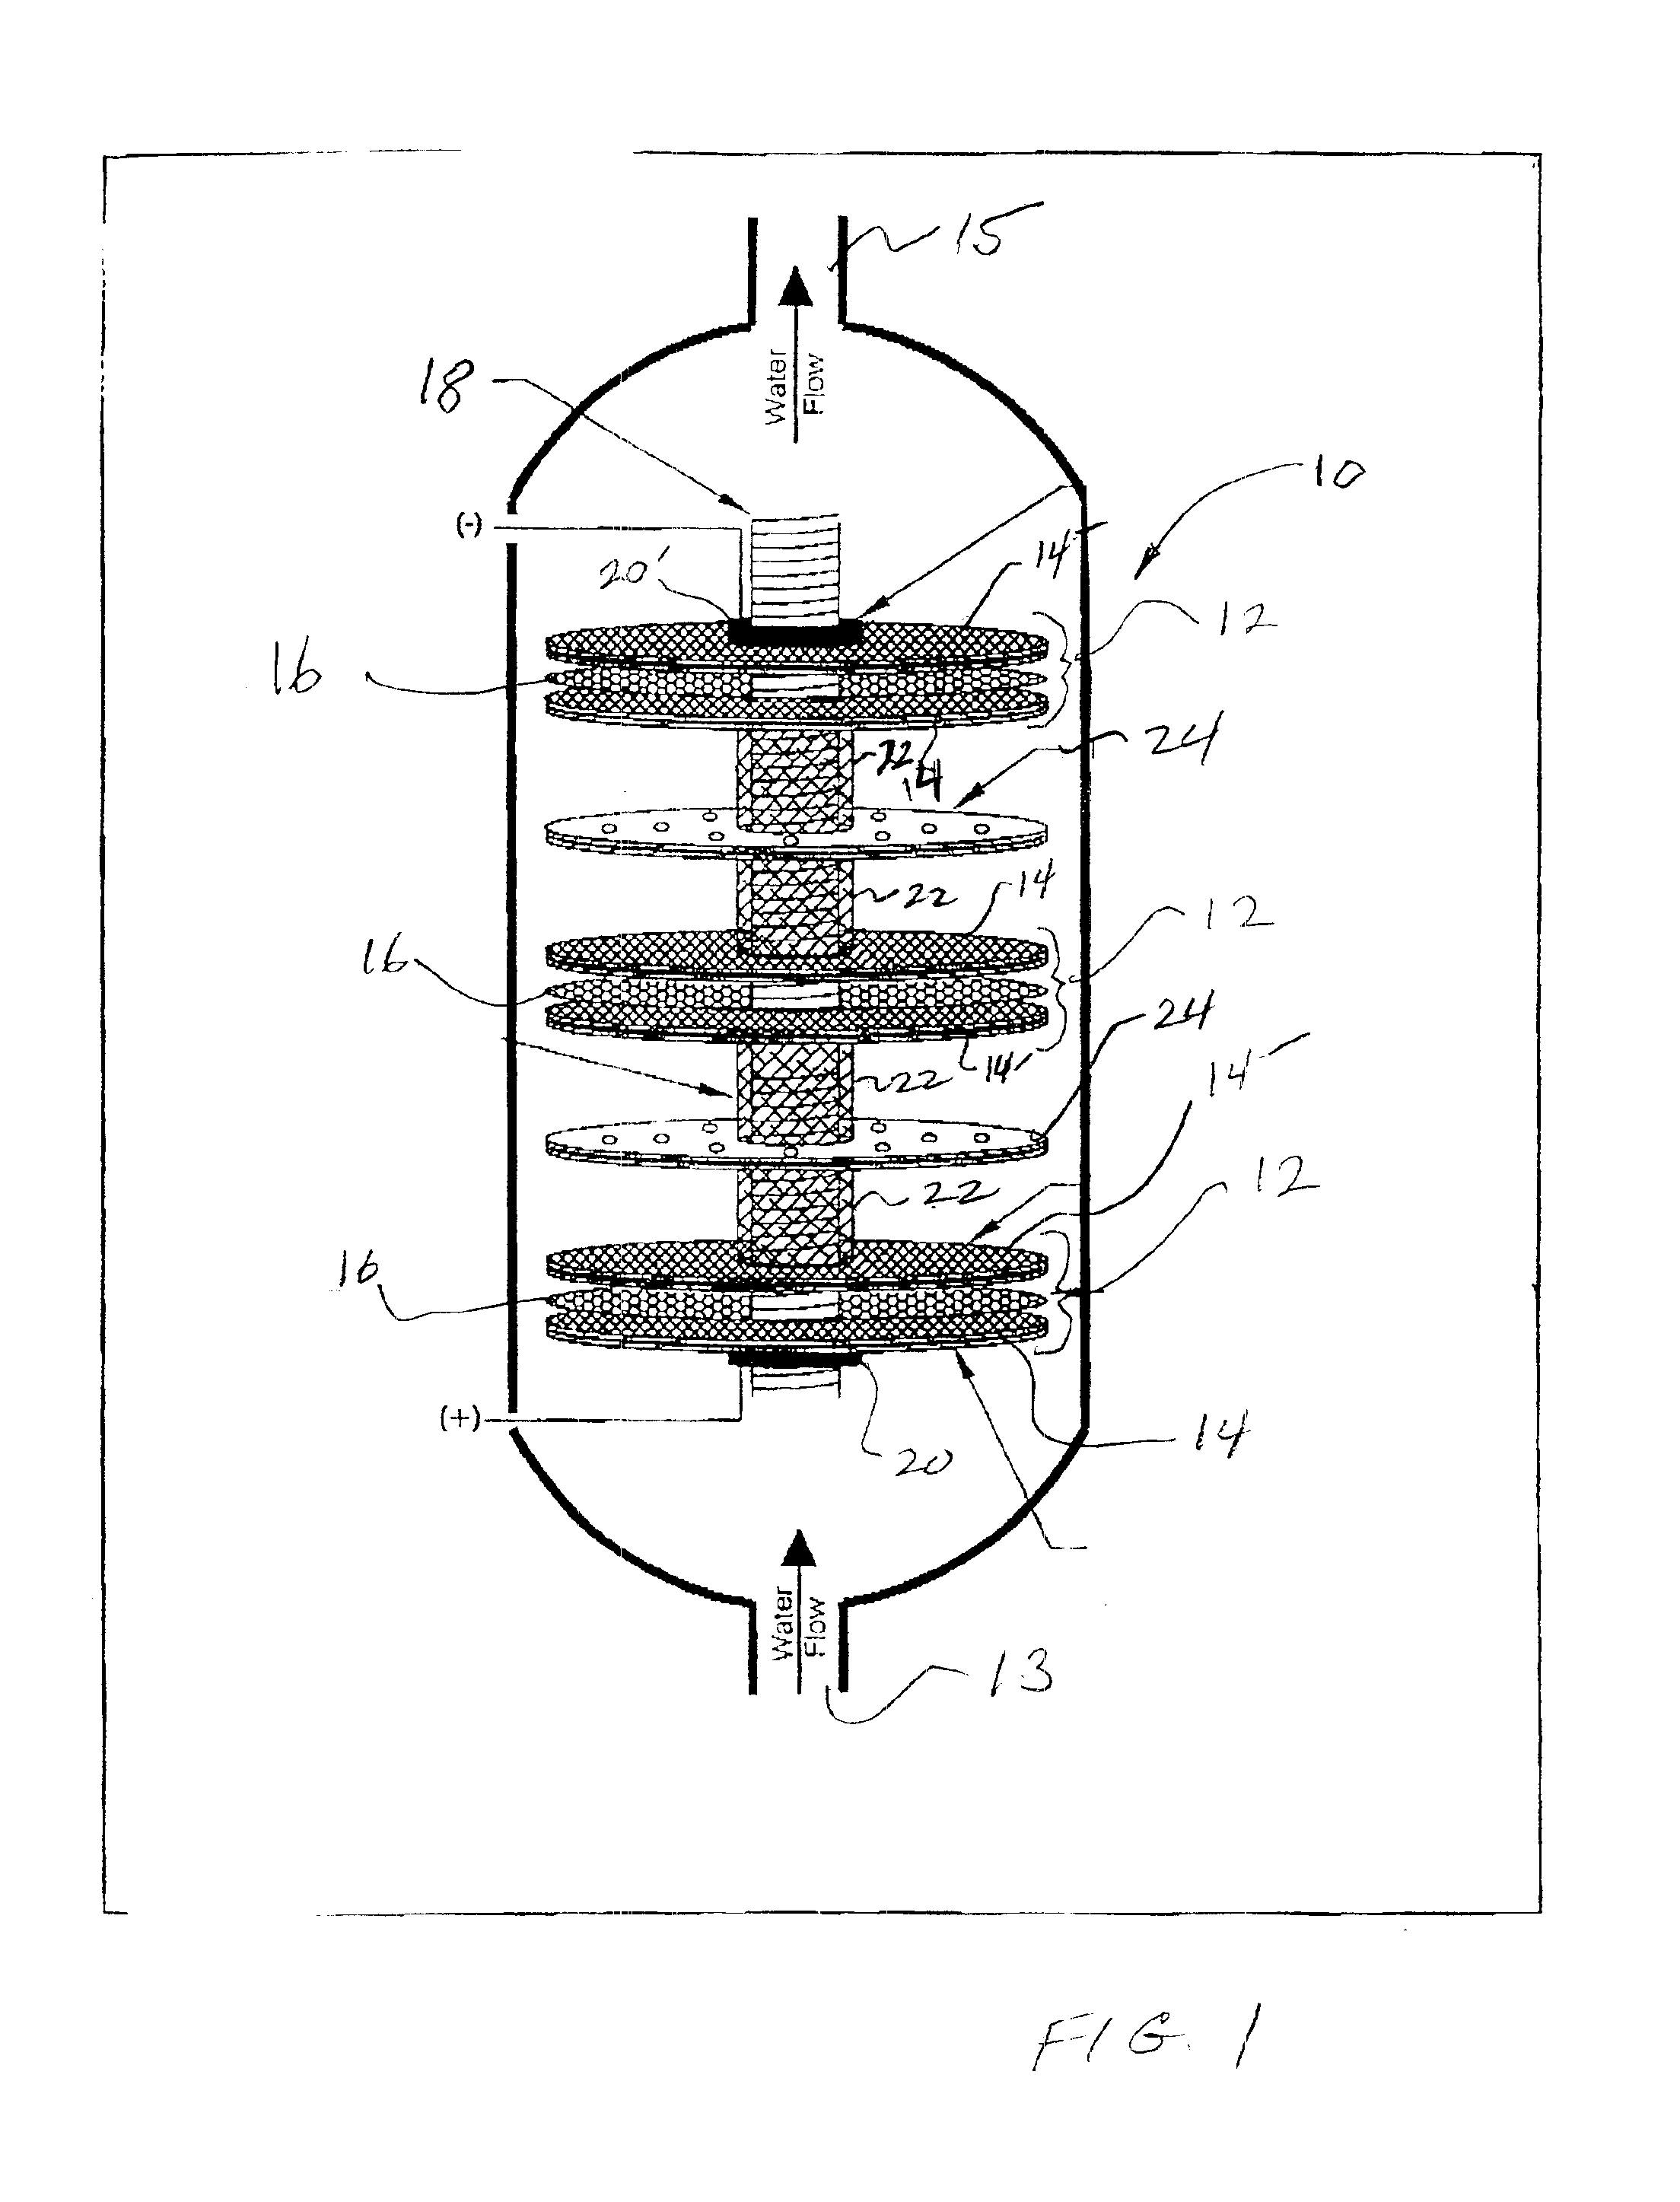 Electrolytic catalytic oxidation system